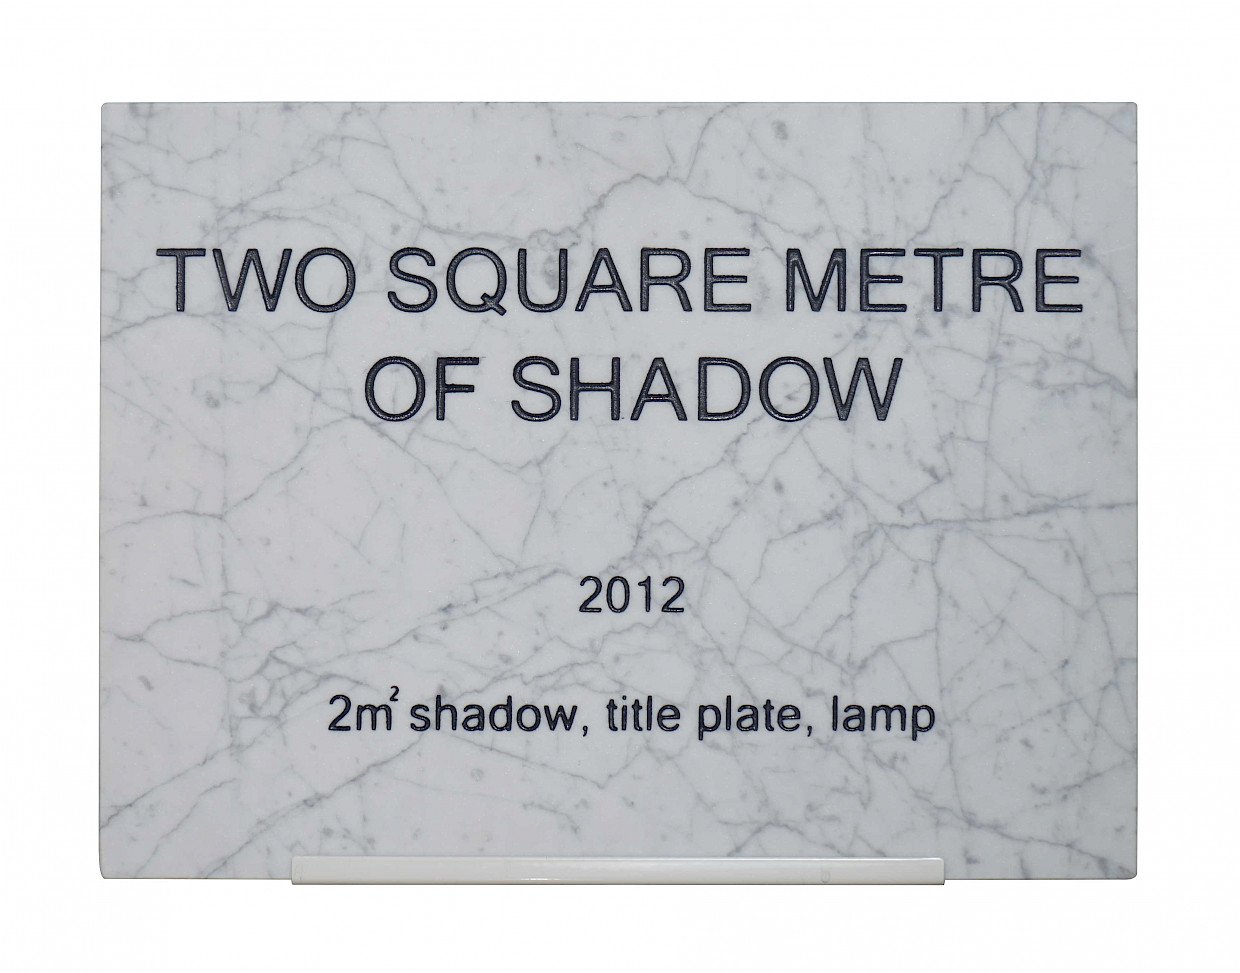 Image from Two square metre of shadow by Rumiko Hagiwara